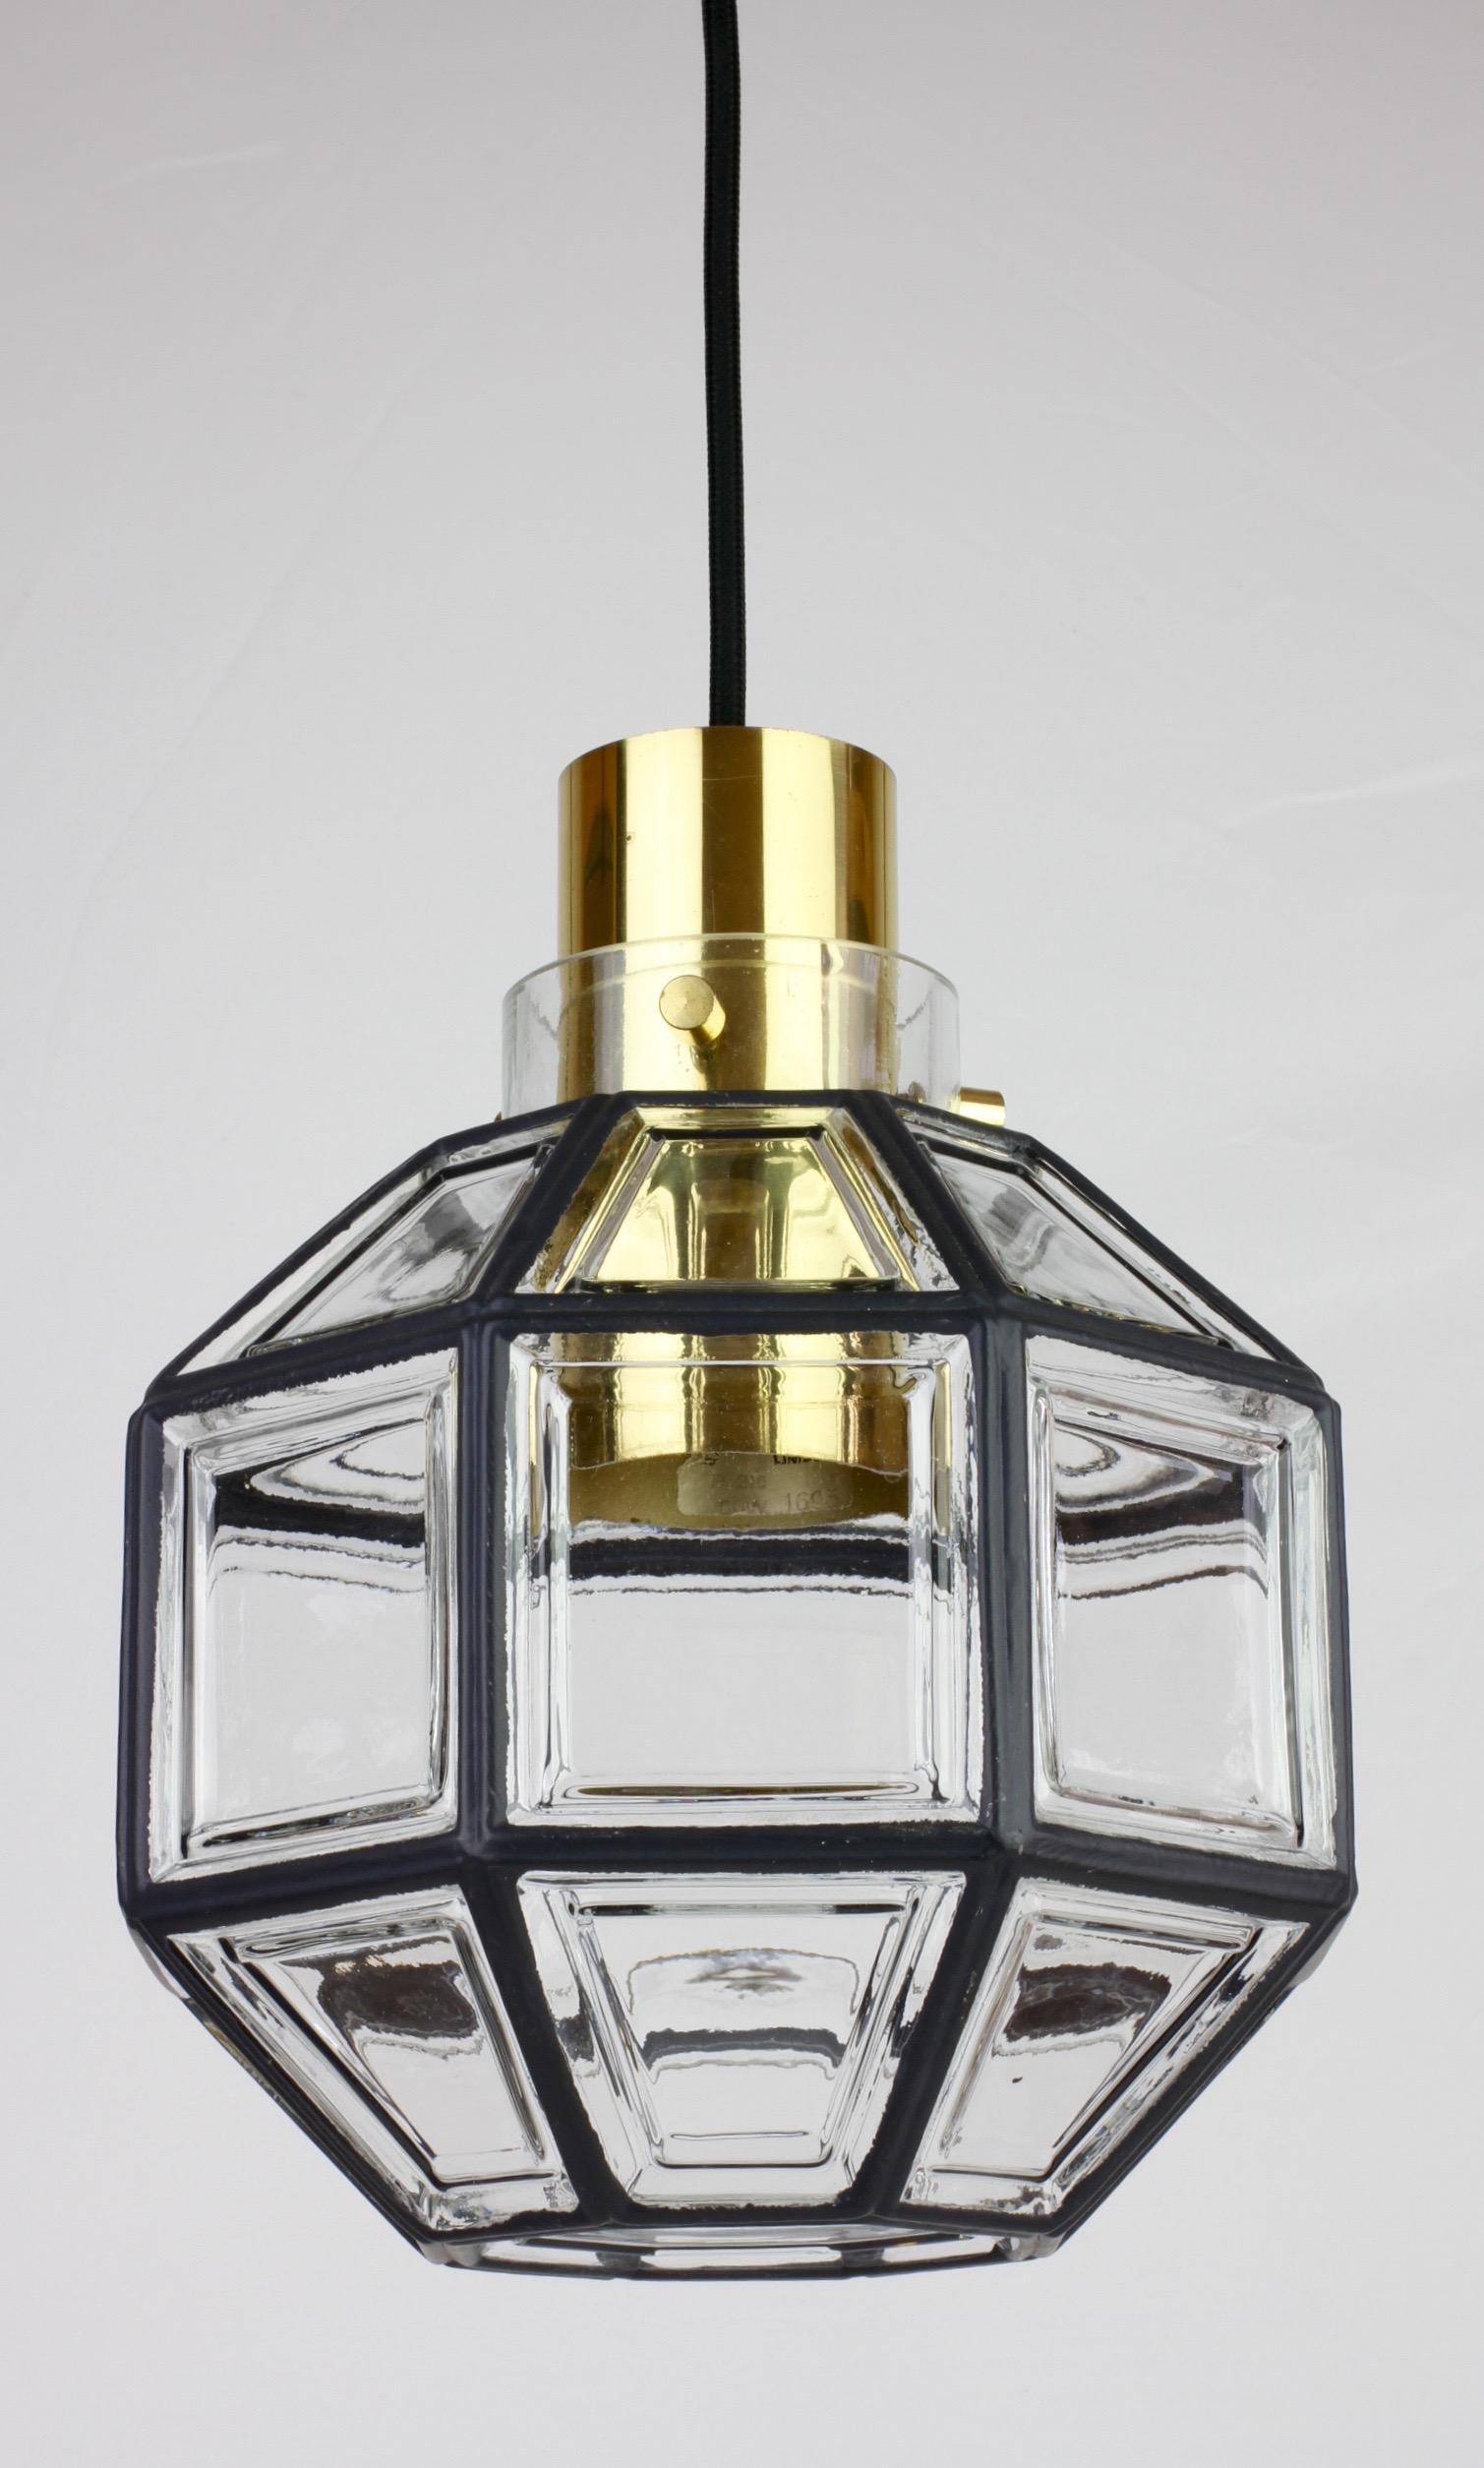 One of a set four beautifully designed and crafted octagonally shaped and multi-faceted clear glass & polished brass Mid-Century pendant light. These large minimalistic, Contemporary Art Deco and Lantern style lights were designed by Hans-Agne